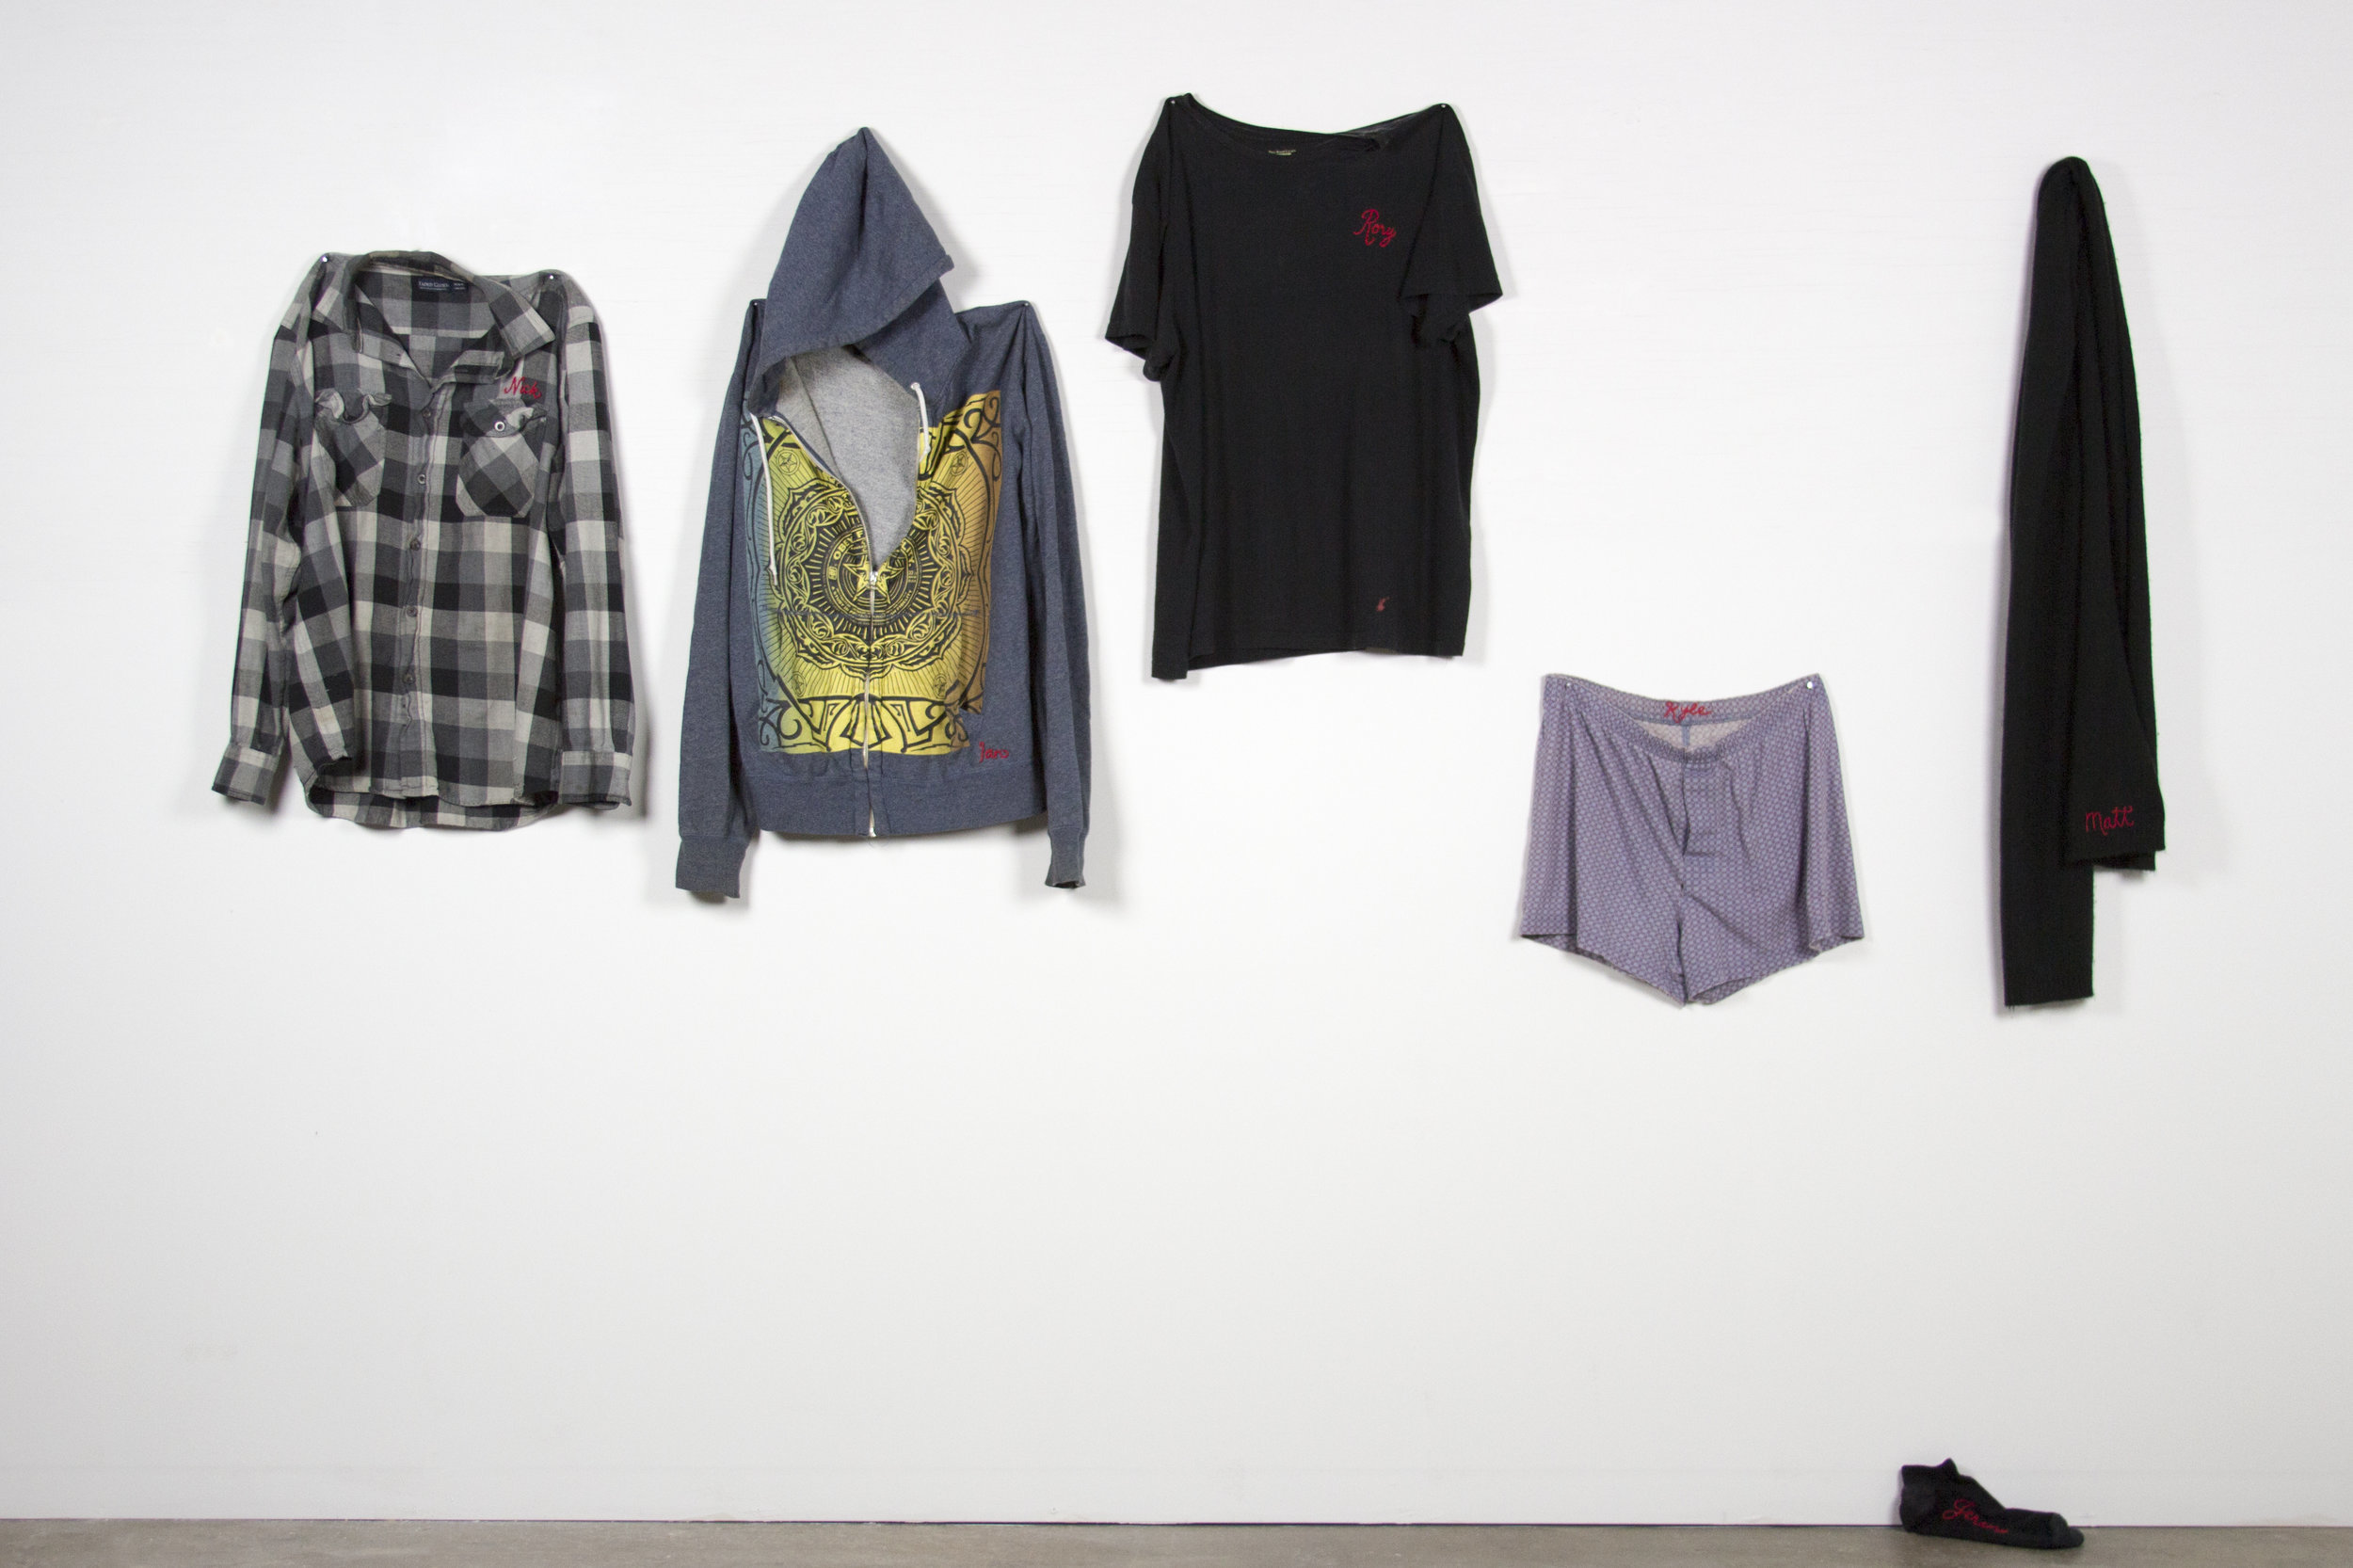 Erica Mendoza, #WasteHerTime2013to2017, hand-embroidered ex-boyfriend clothing, installation dimensions vary, 2017